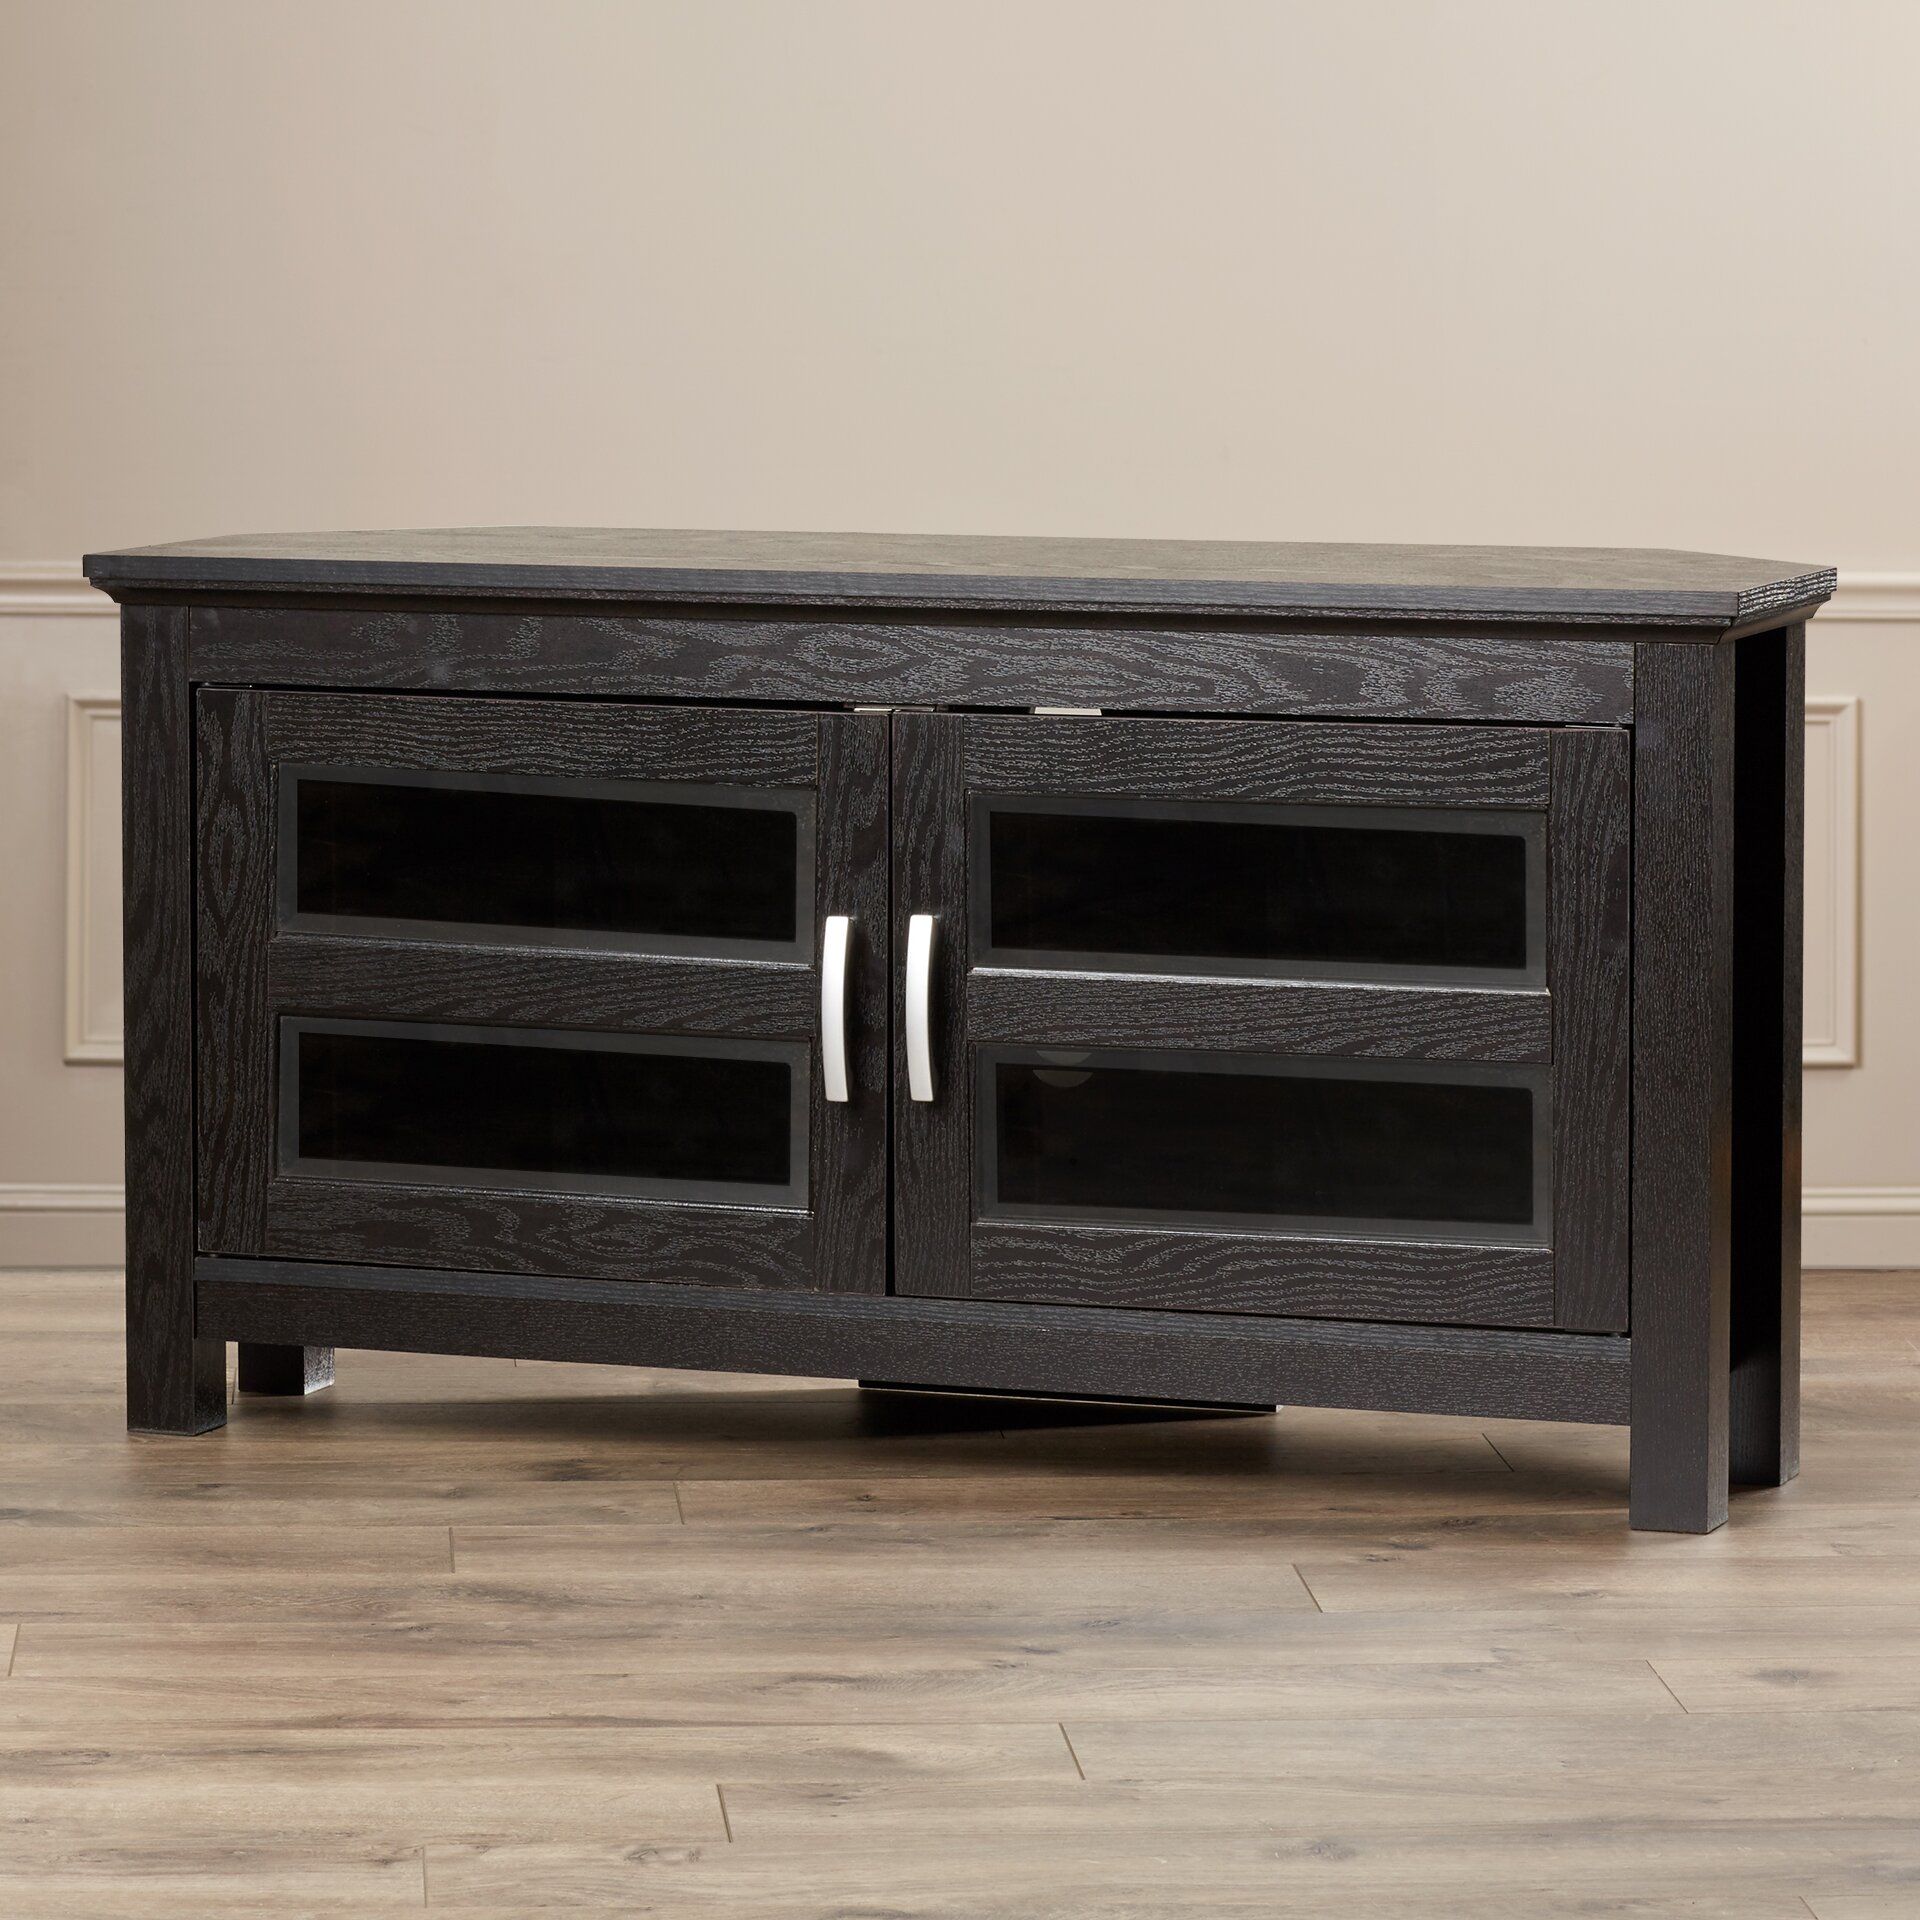 Alcott Hill Sulyard Wood Corner Tv Stand & Reviews | Wayfair For Wooden Tv Stand Corner Units (Photo 10 of 15)